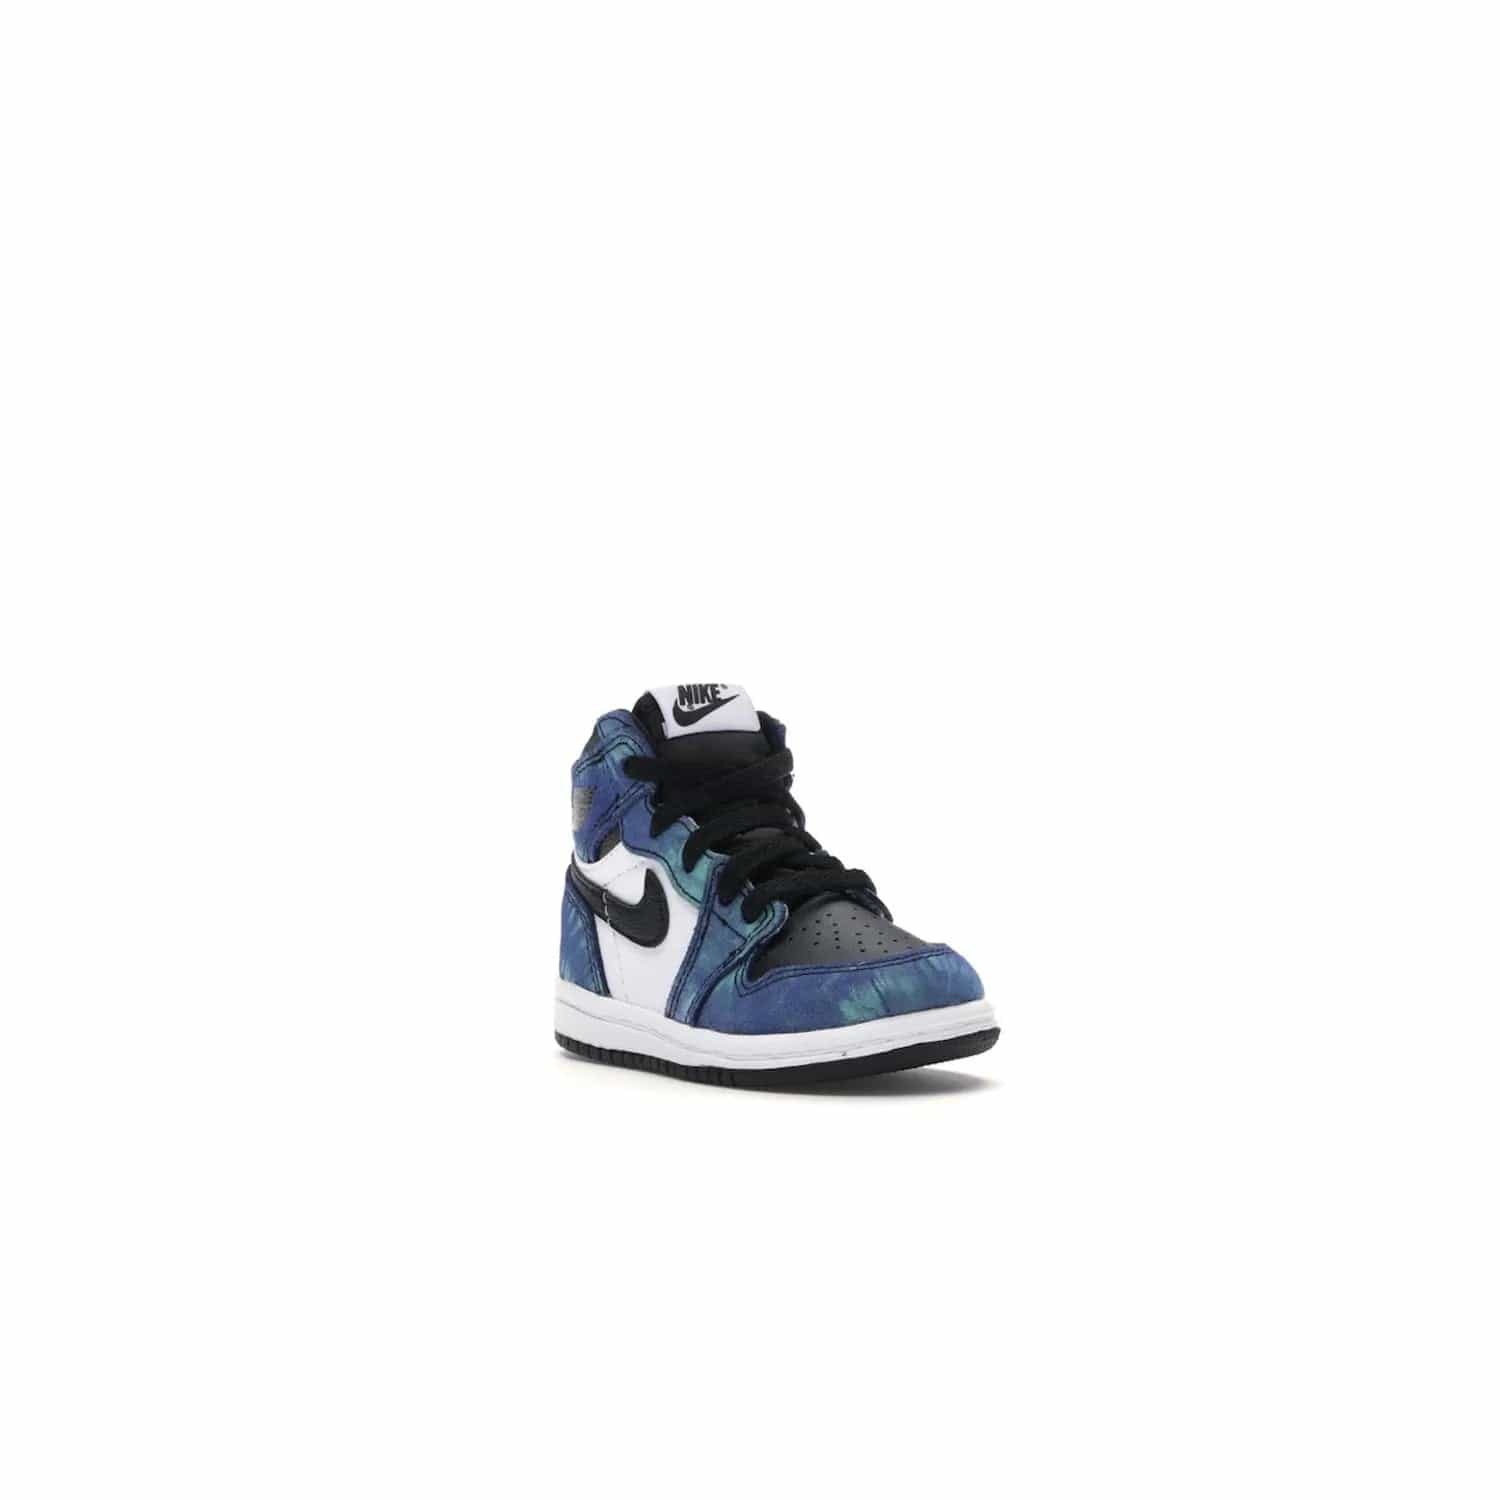 Jordan 1 Retro High Tie Dye (TD) - Image 6 - Only at www.BallersClubKickz.com - Add a unique twist to your sneaker collection with the Jordan 1 Retro High Tie Dye (TD). Classic Air Jordan 1 details like toe box perforations and the signature Swoosh logo on the sidewall are topped with an eye-catching tie dye design that’s perfect for styling all year round.